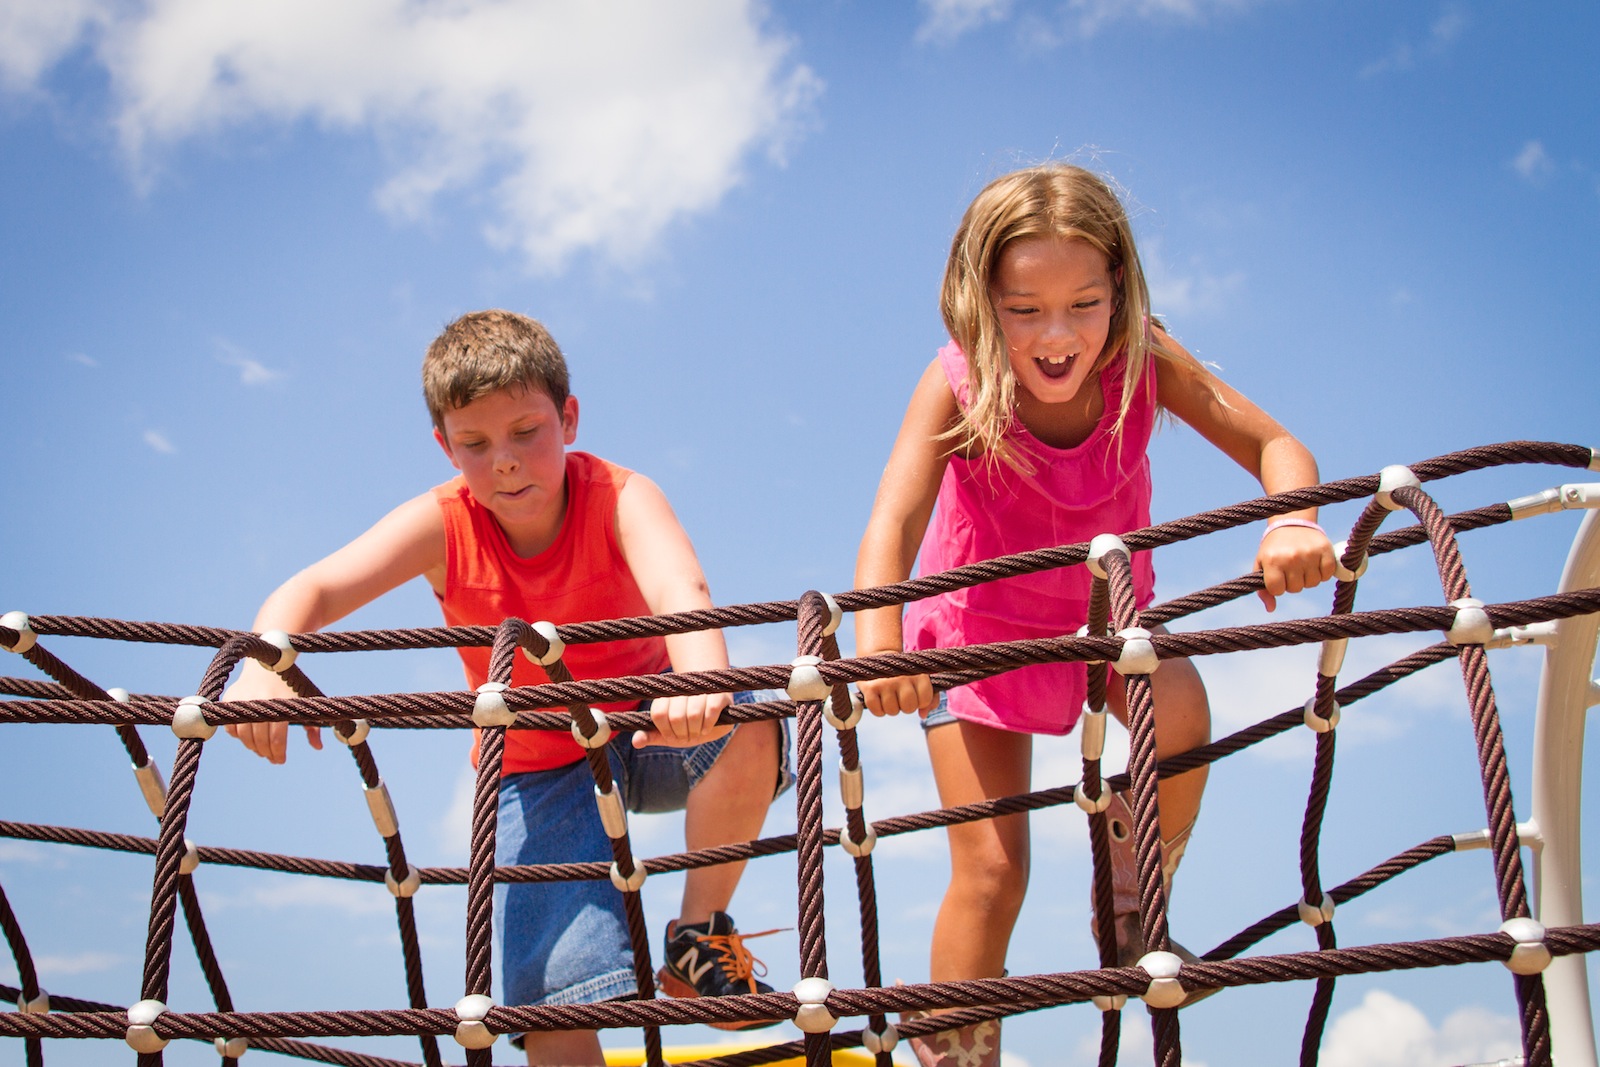 Net tunnels, walls and bridges create a climbing experience that builds strength and encourages teamwork.